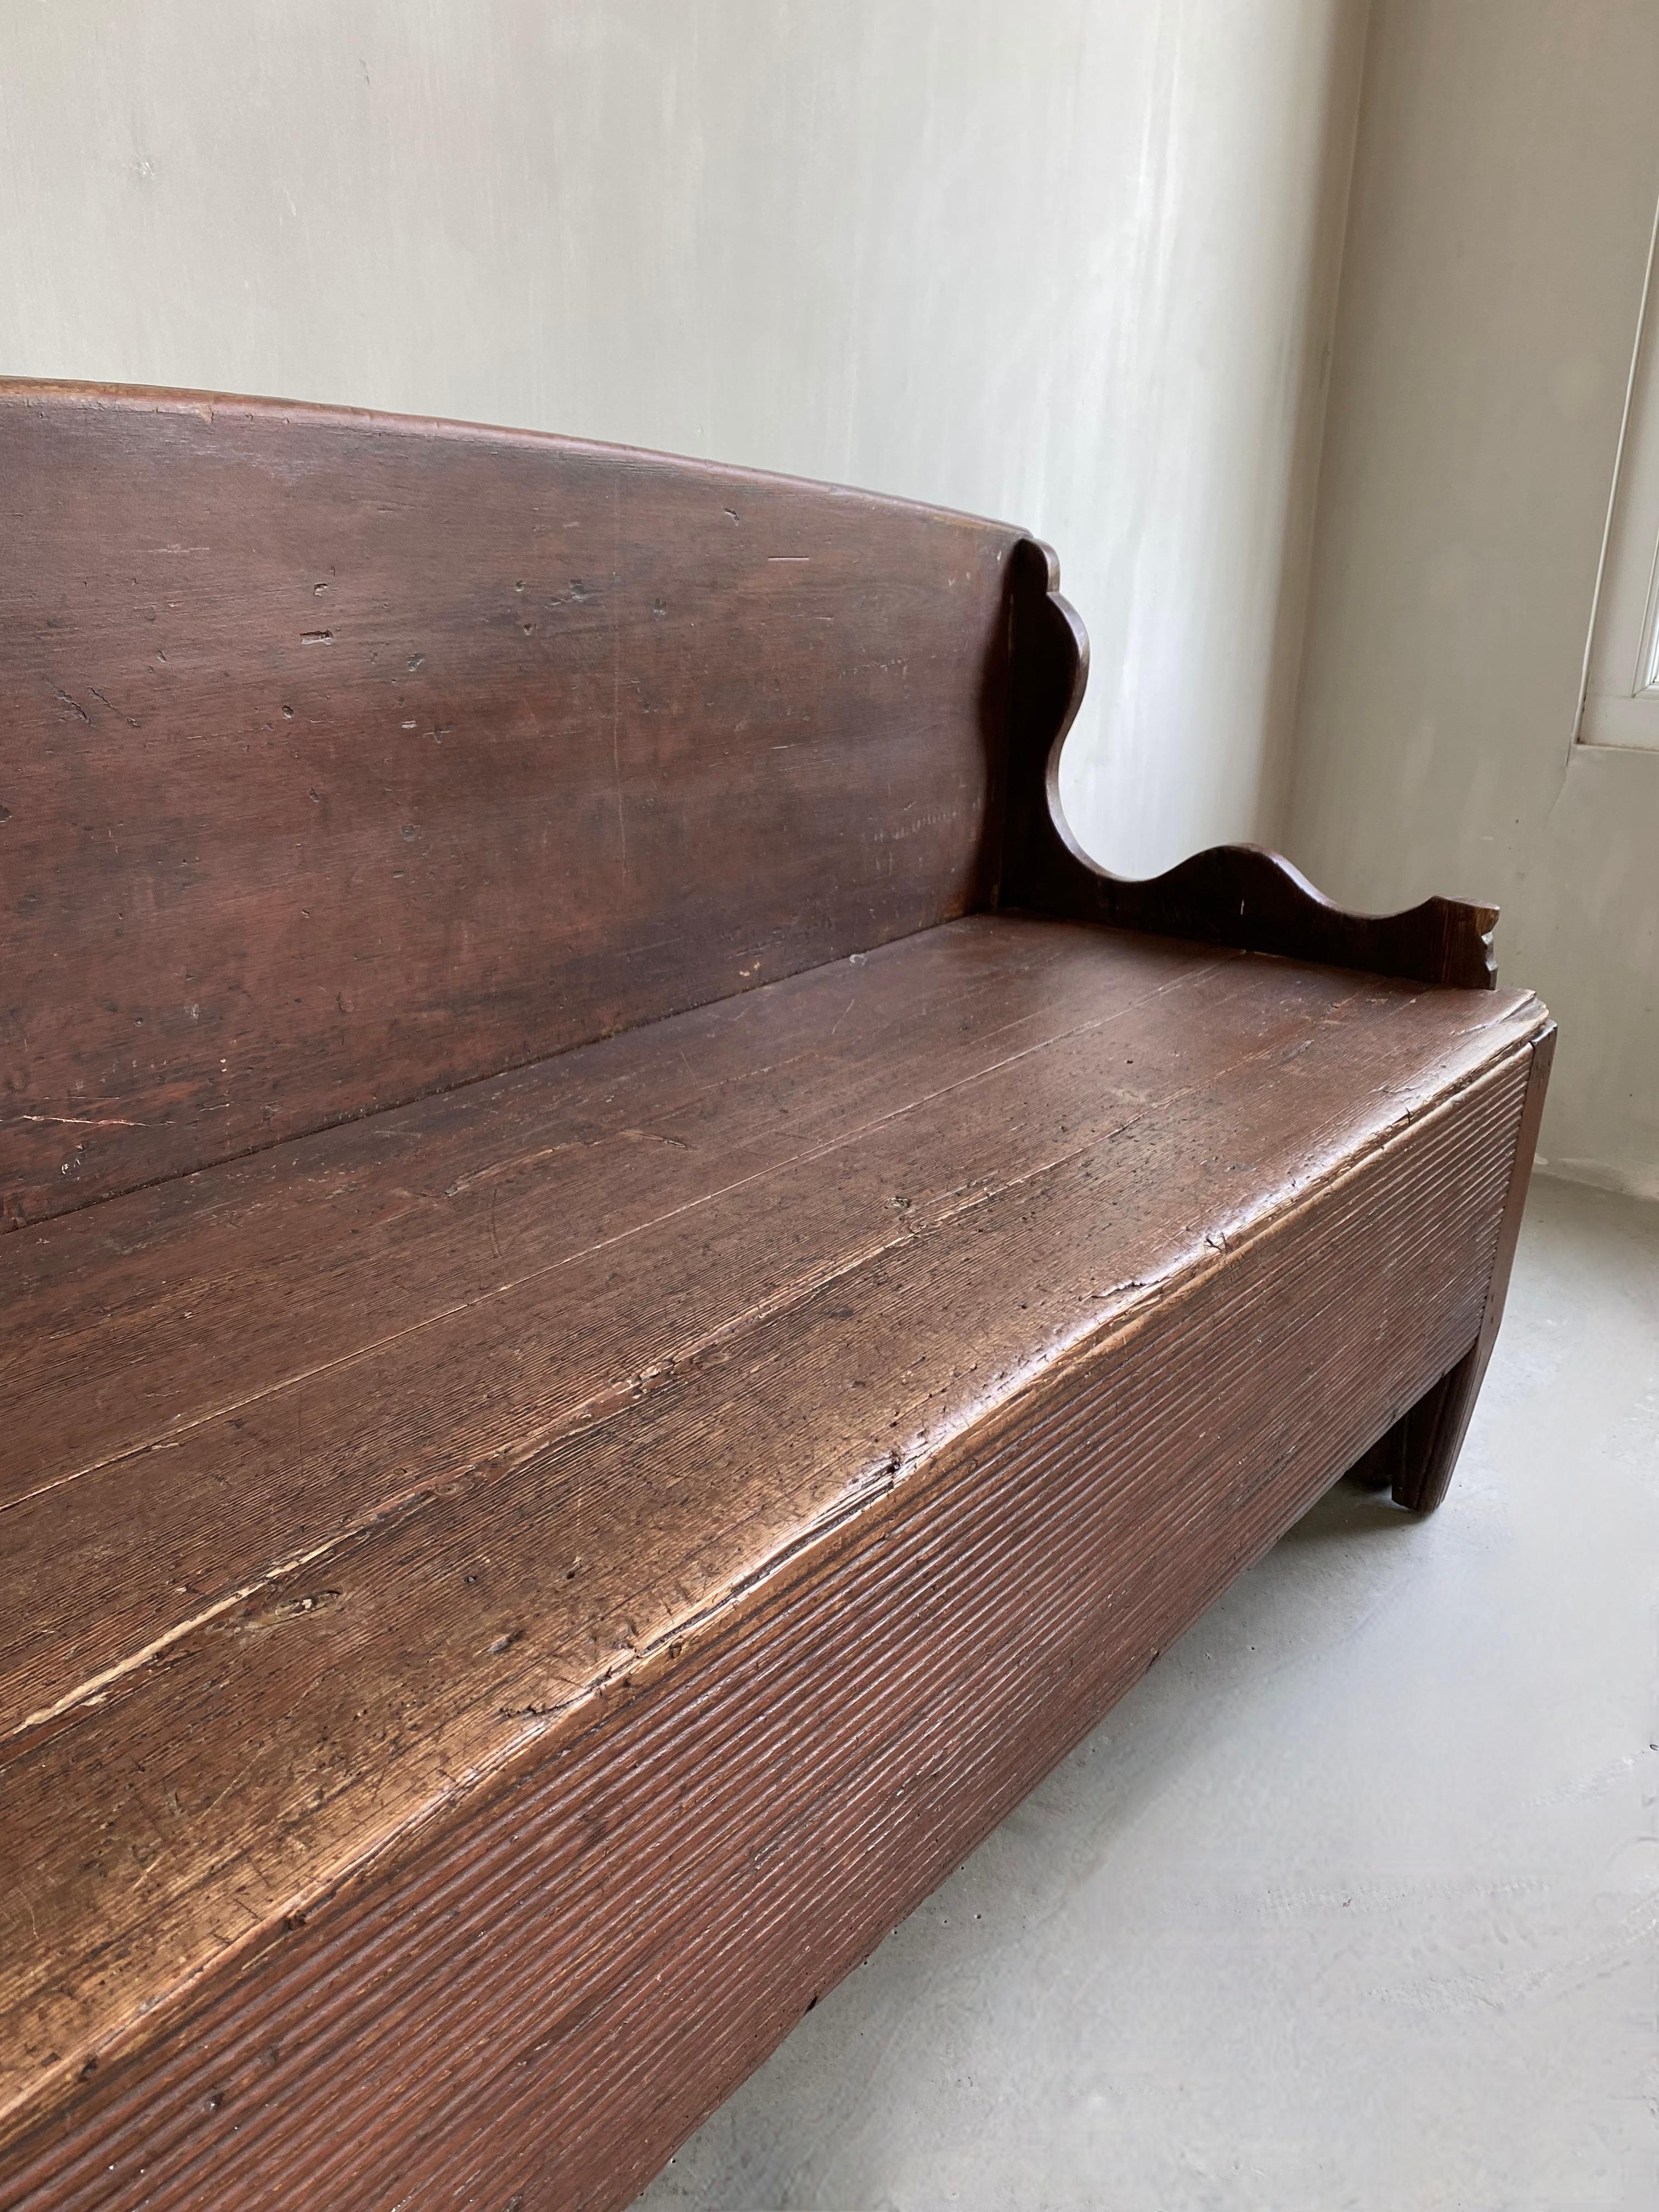 Extremely beautiful Gustavian sofa, Sweden ca. 1840 in very heavy Pine wood in excellent condition.
An eye-catcher due to the fantastic wood carving, the fantastic warm patina and wide format. Beautiful simplicity!
The seat can be opened to reveal